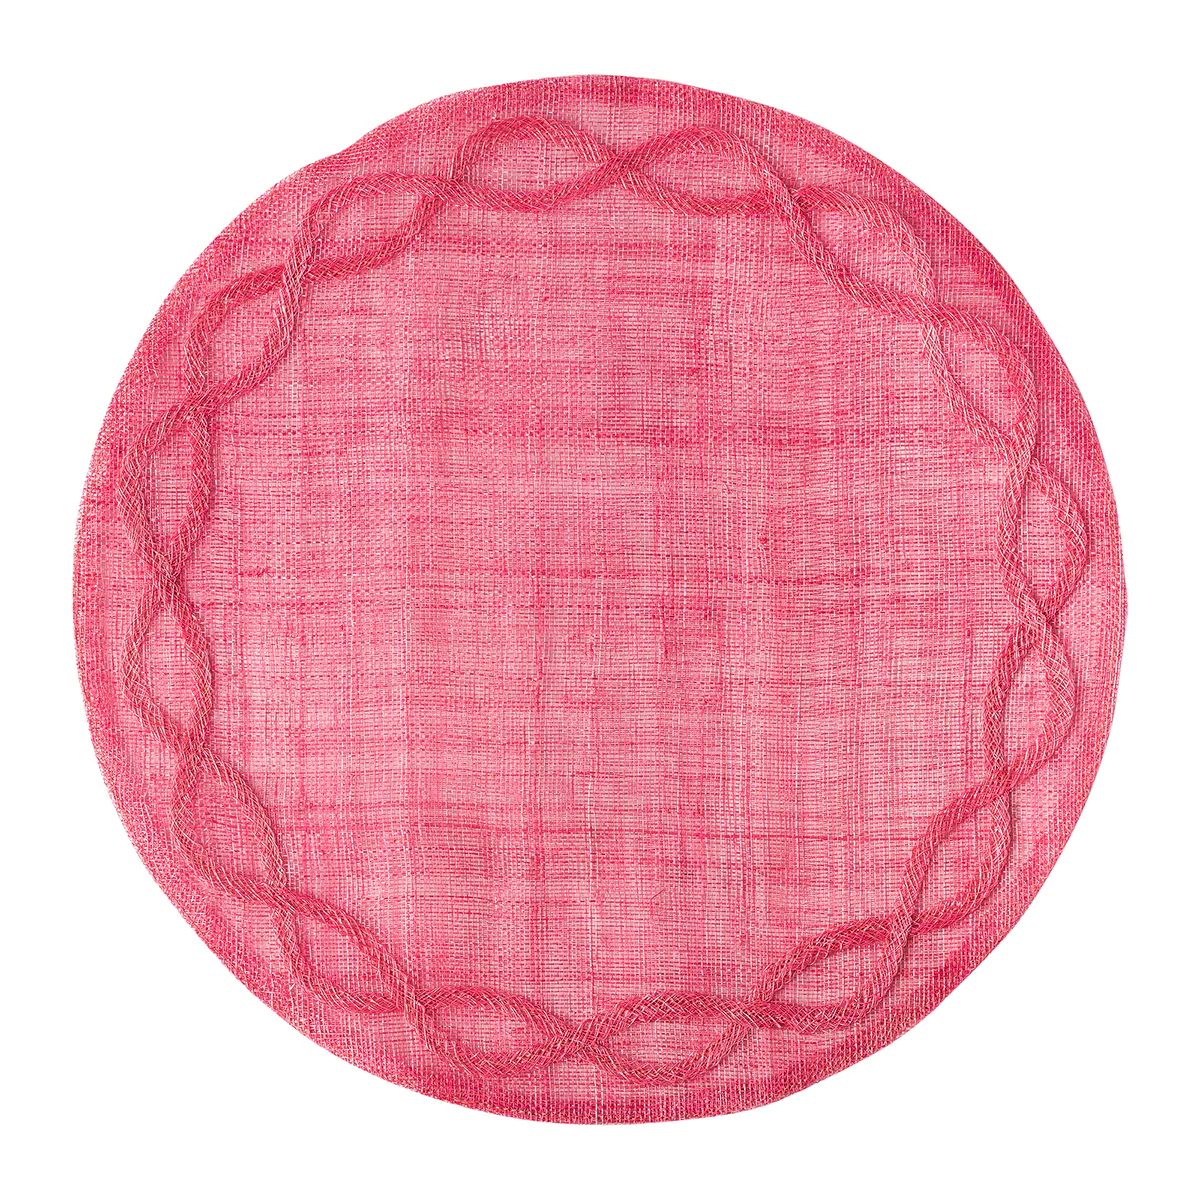 Tuileries Garden Pink Placemat | Over The Moon